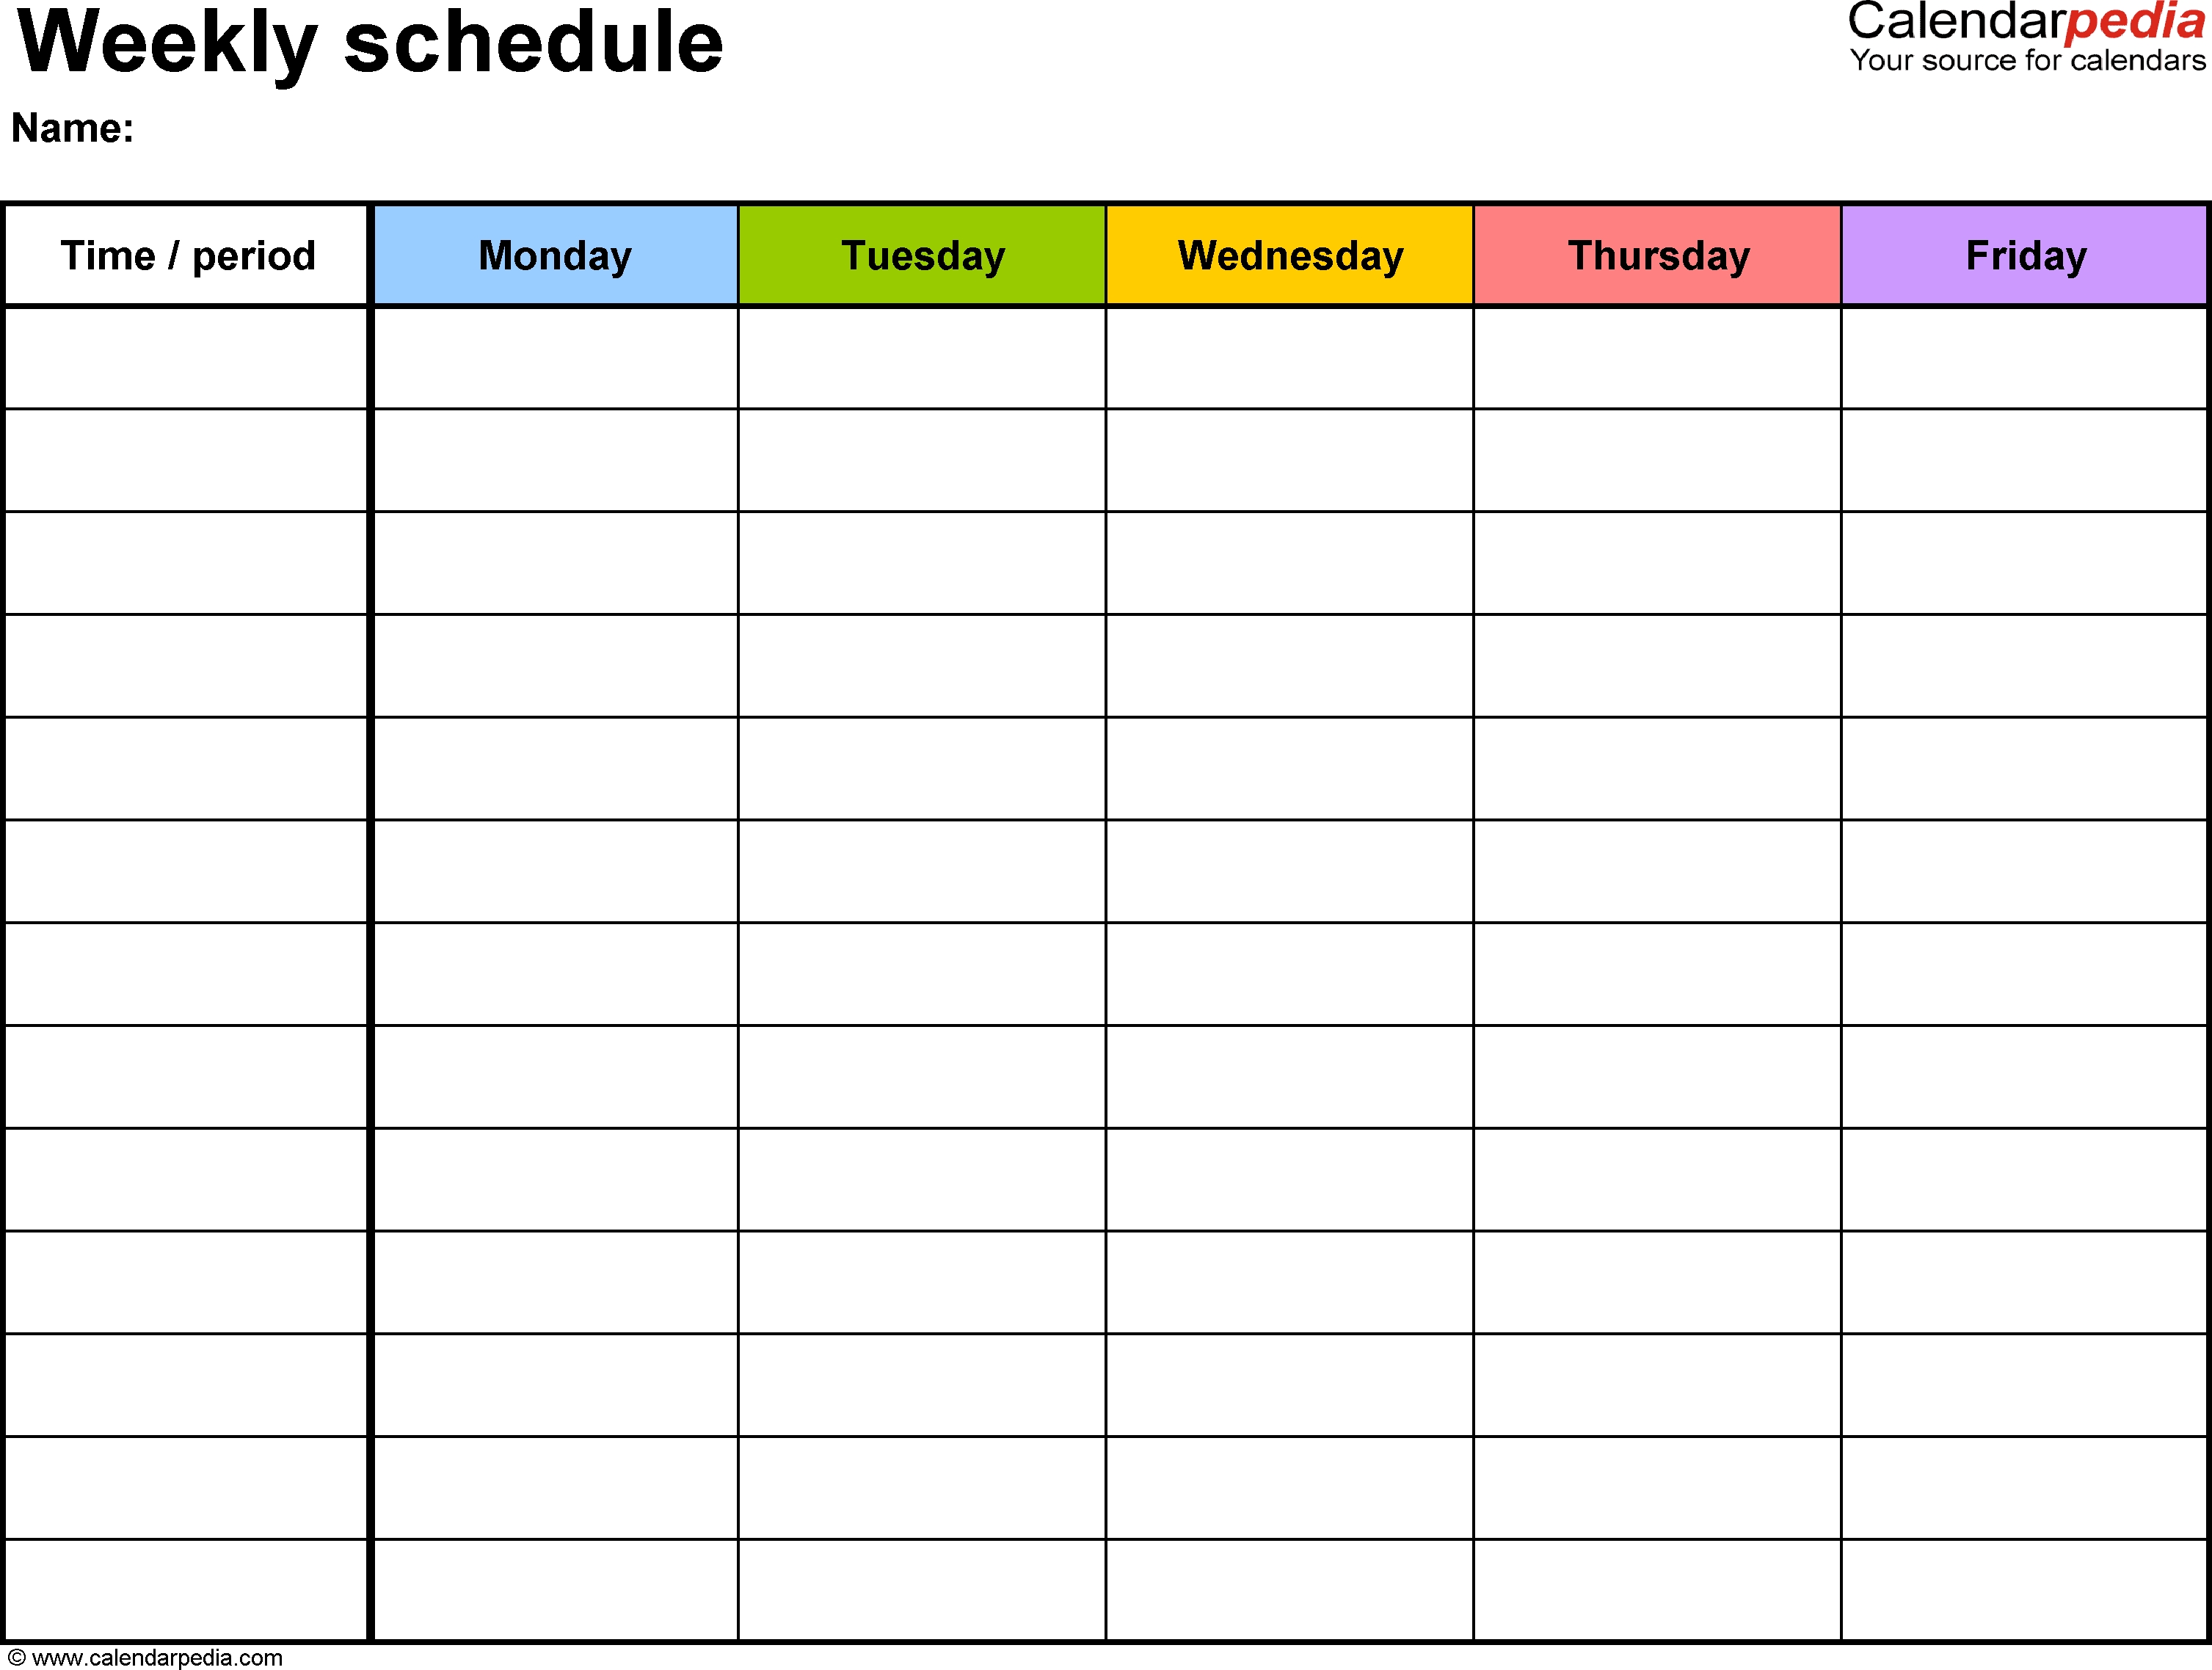 Weekly Schedule Template For Word Version 1: Landscape, 1 Excel Calendar Template That Starts Week On Monday